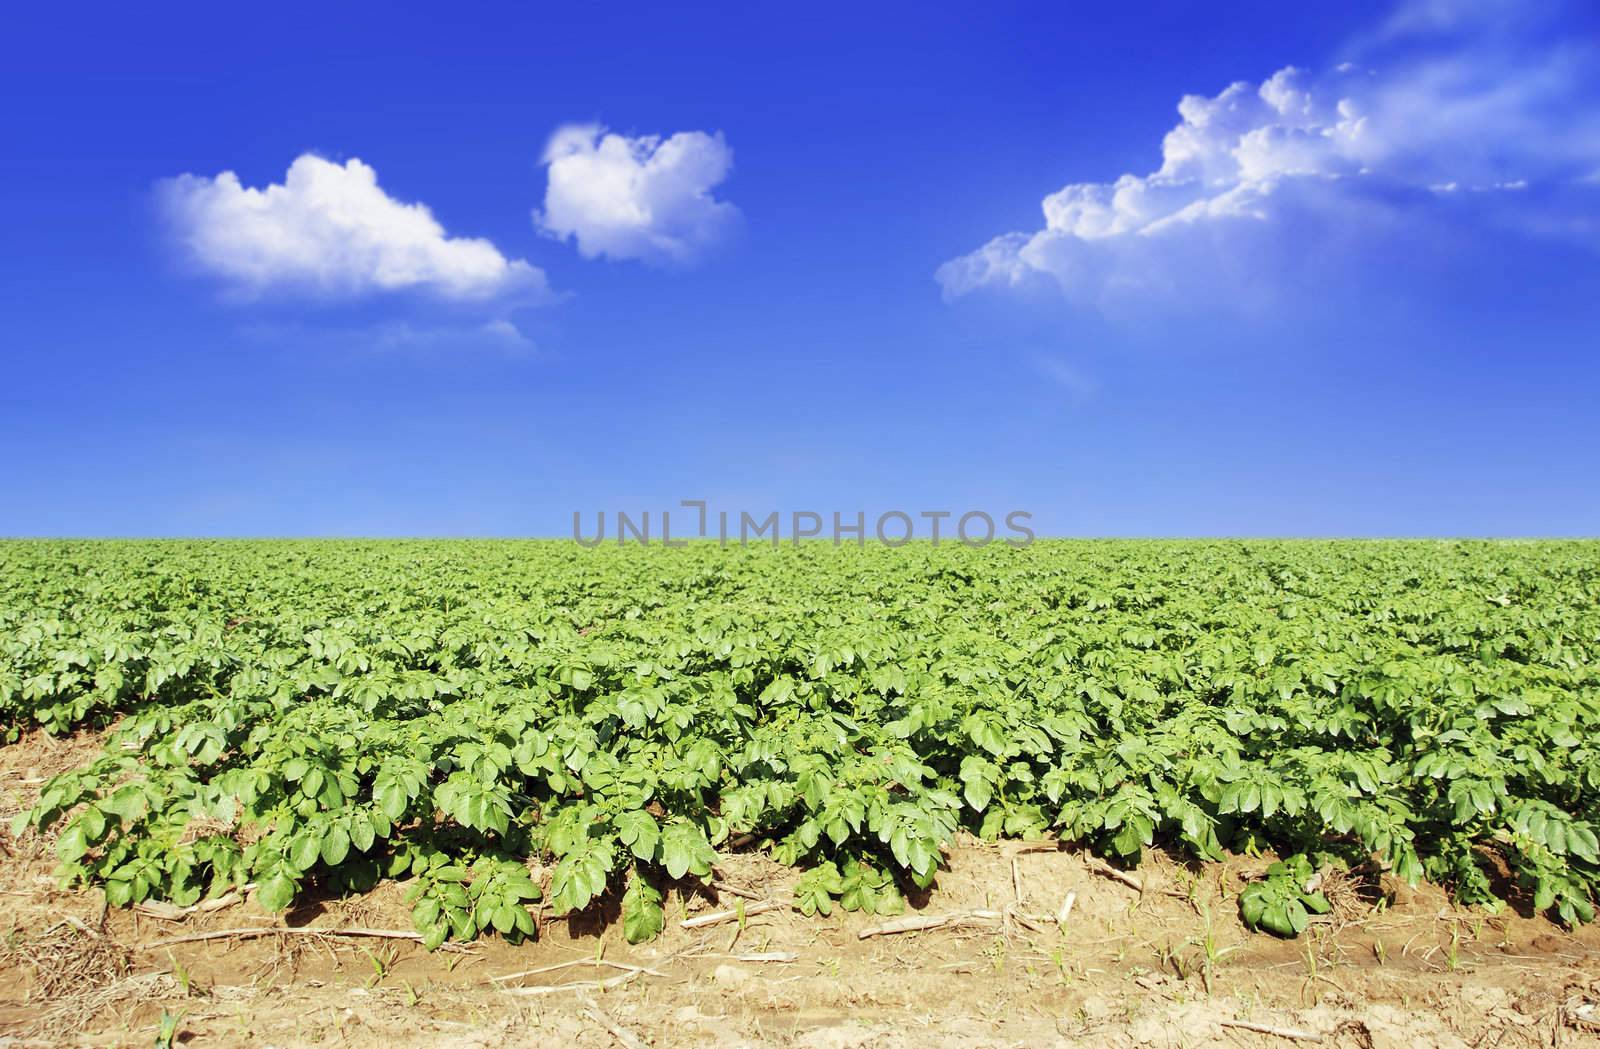 Potato field against blue sky and clouds in sunlight